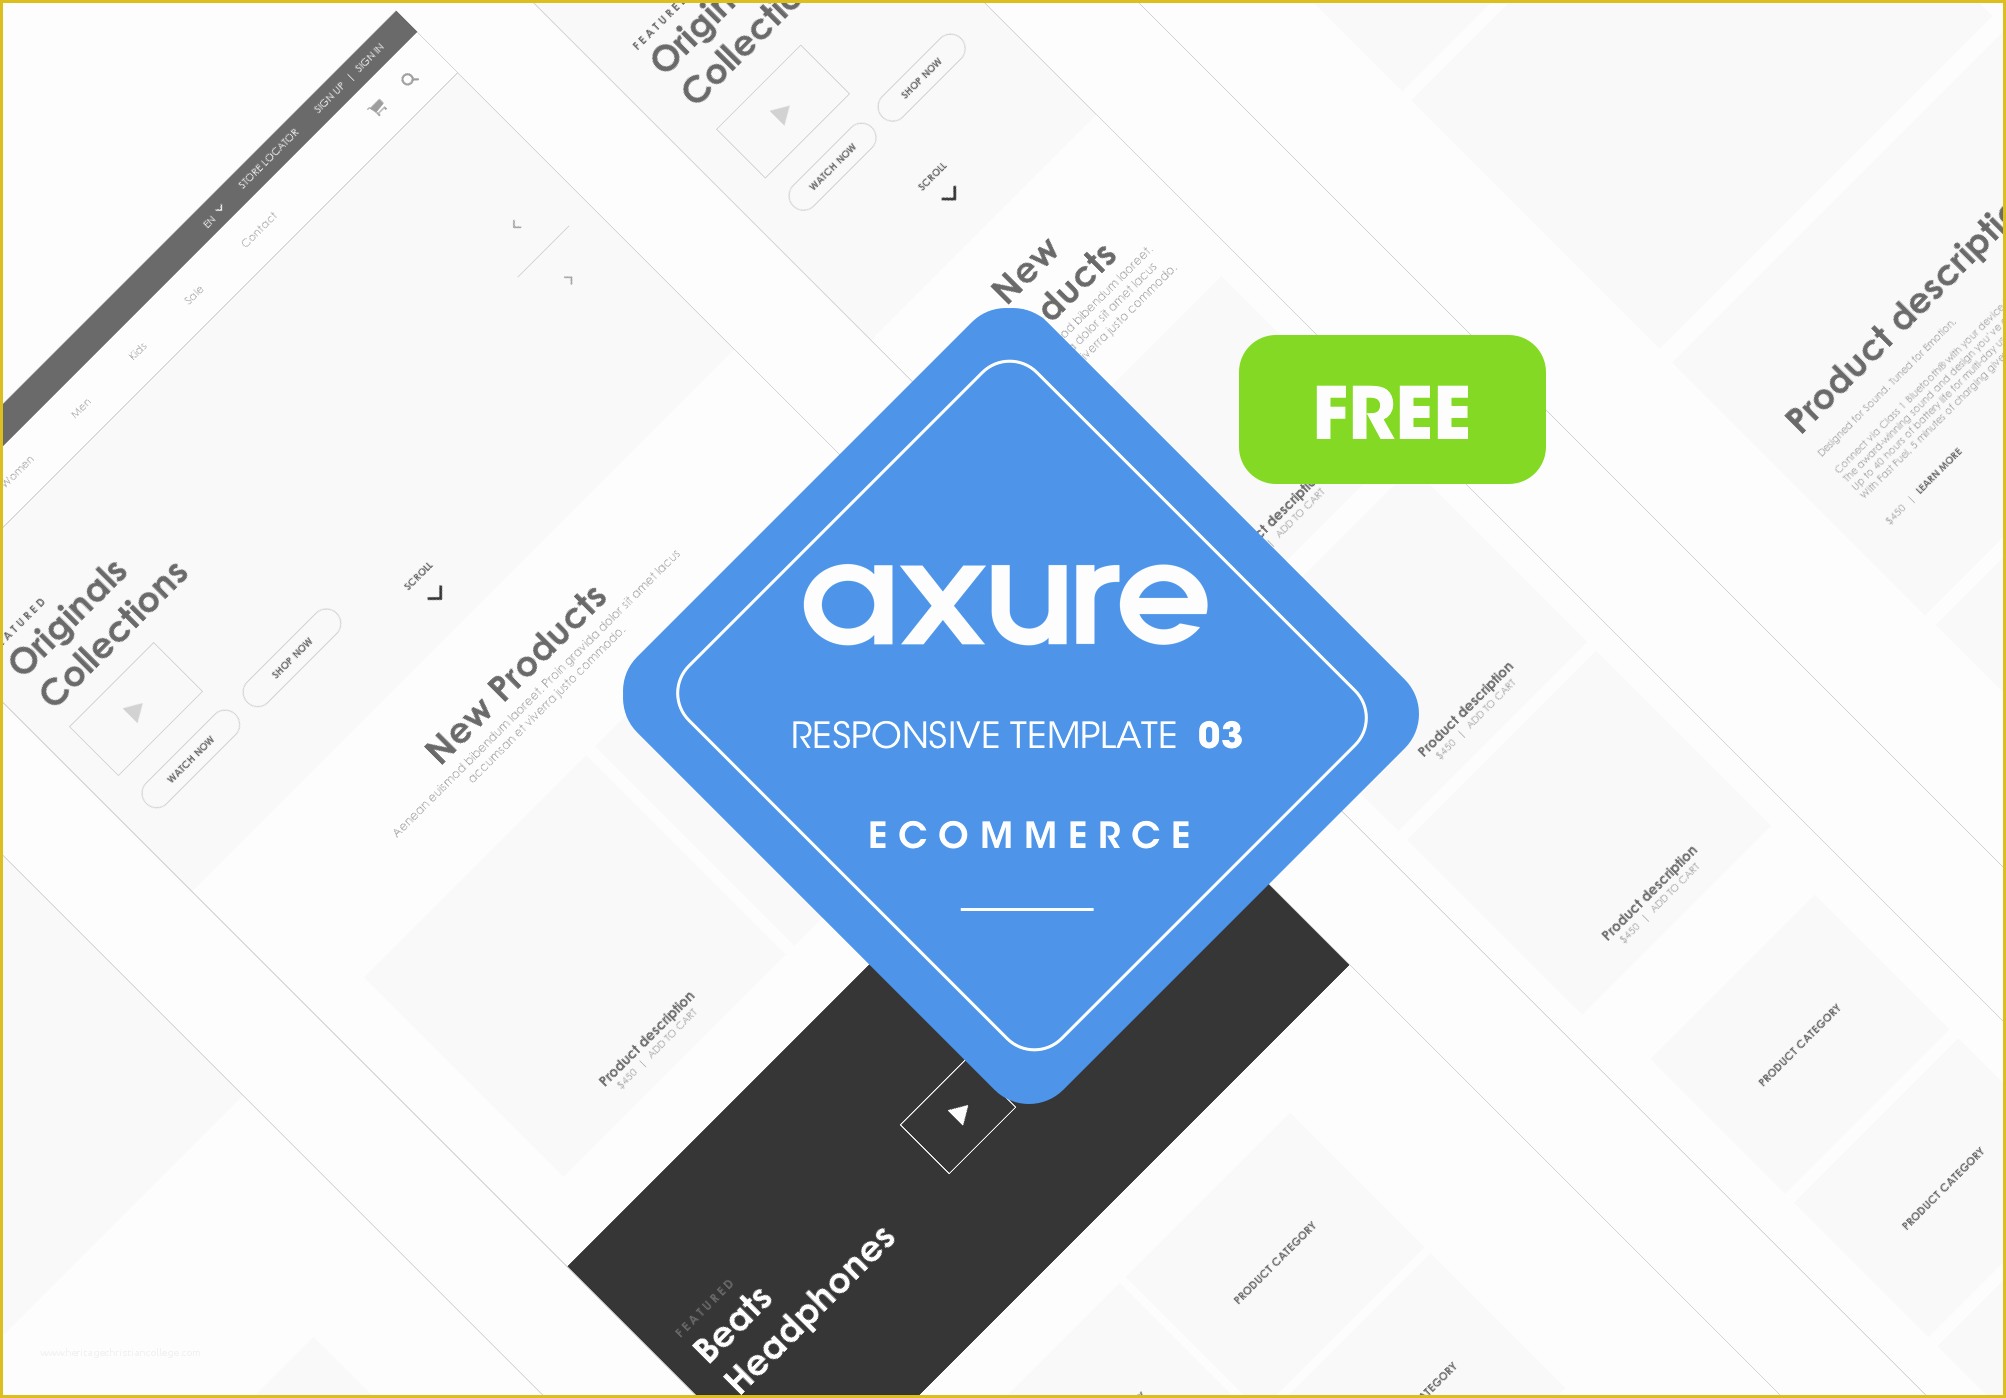 Free Responsive Ecommerce Website Templates Wordpress Of Free Axure Wid S and Library Kits for Wireframing and